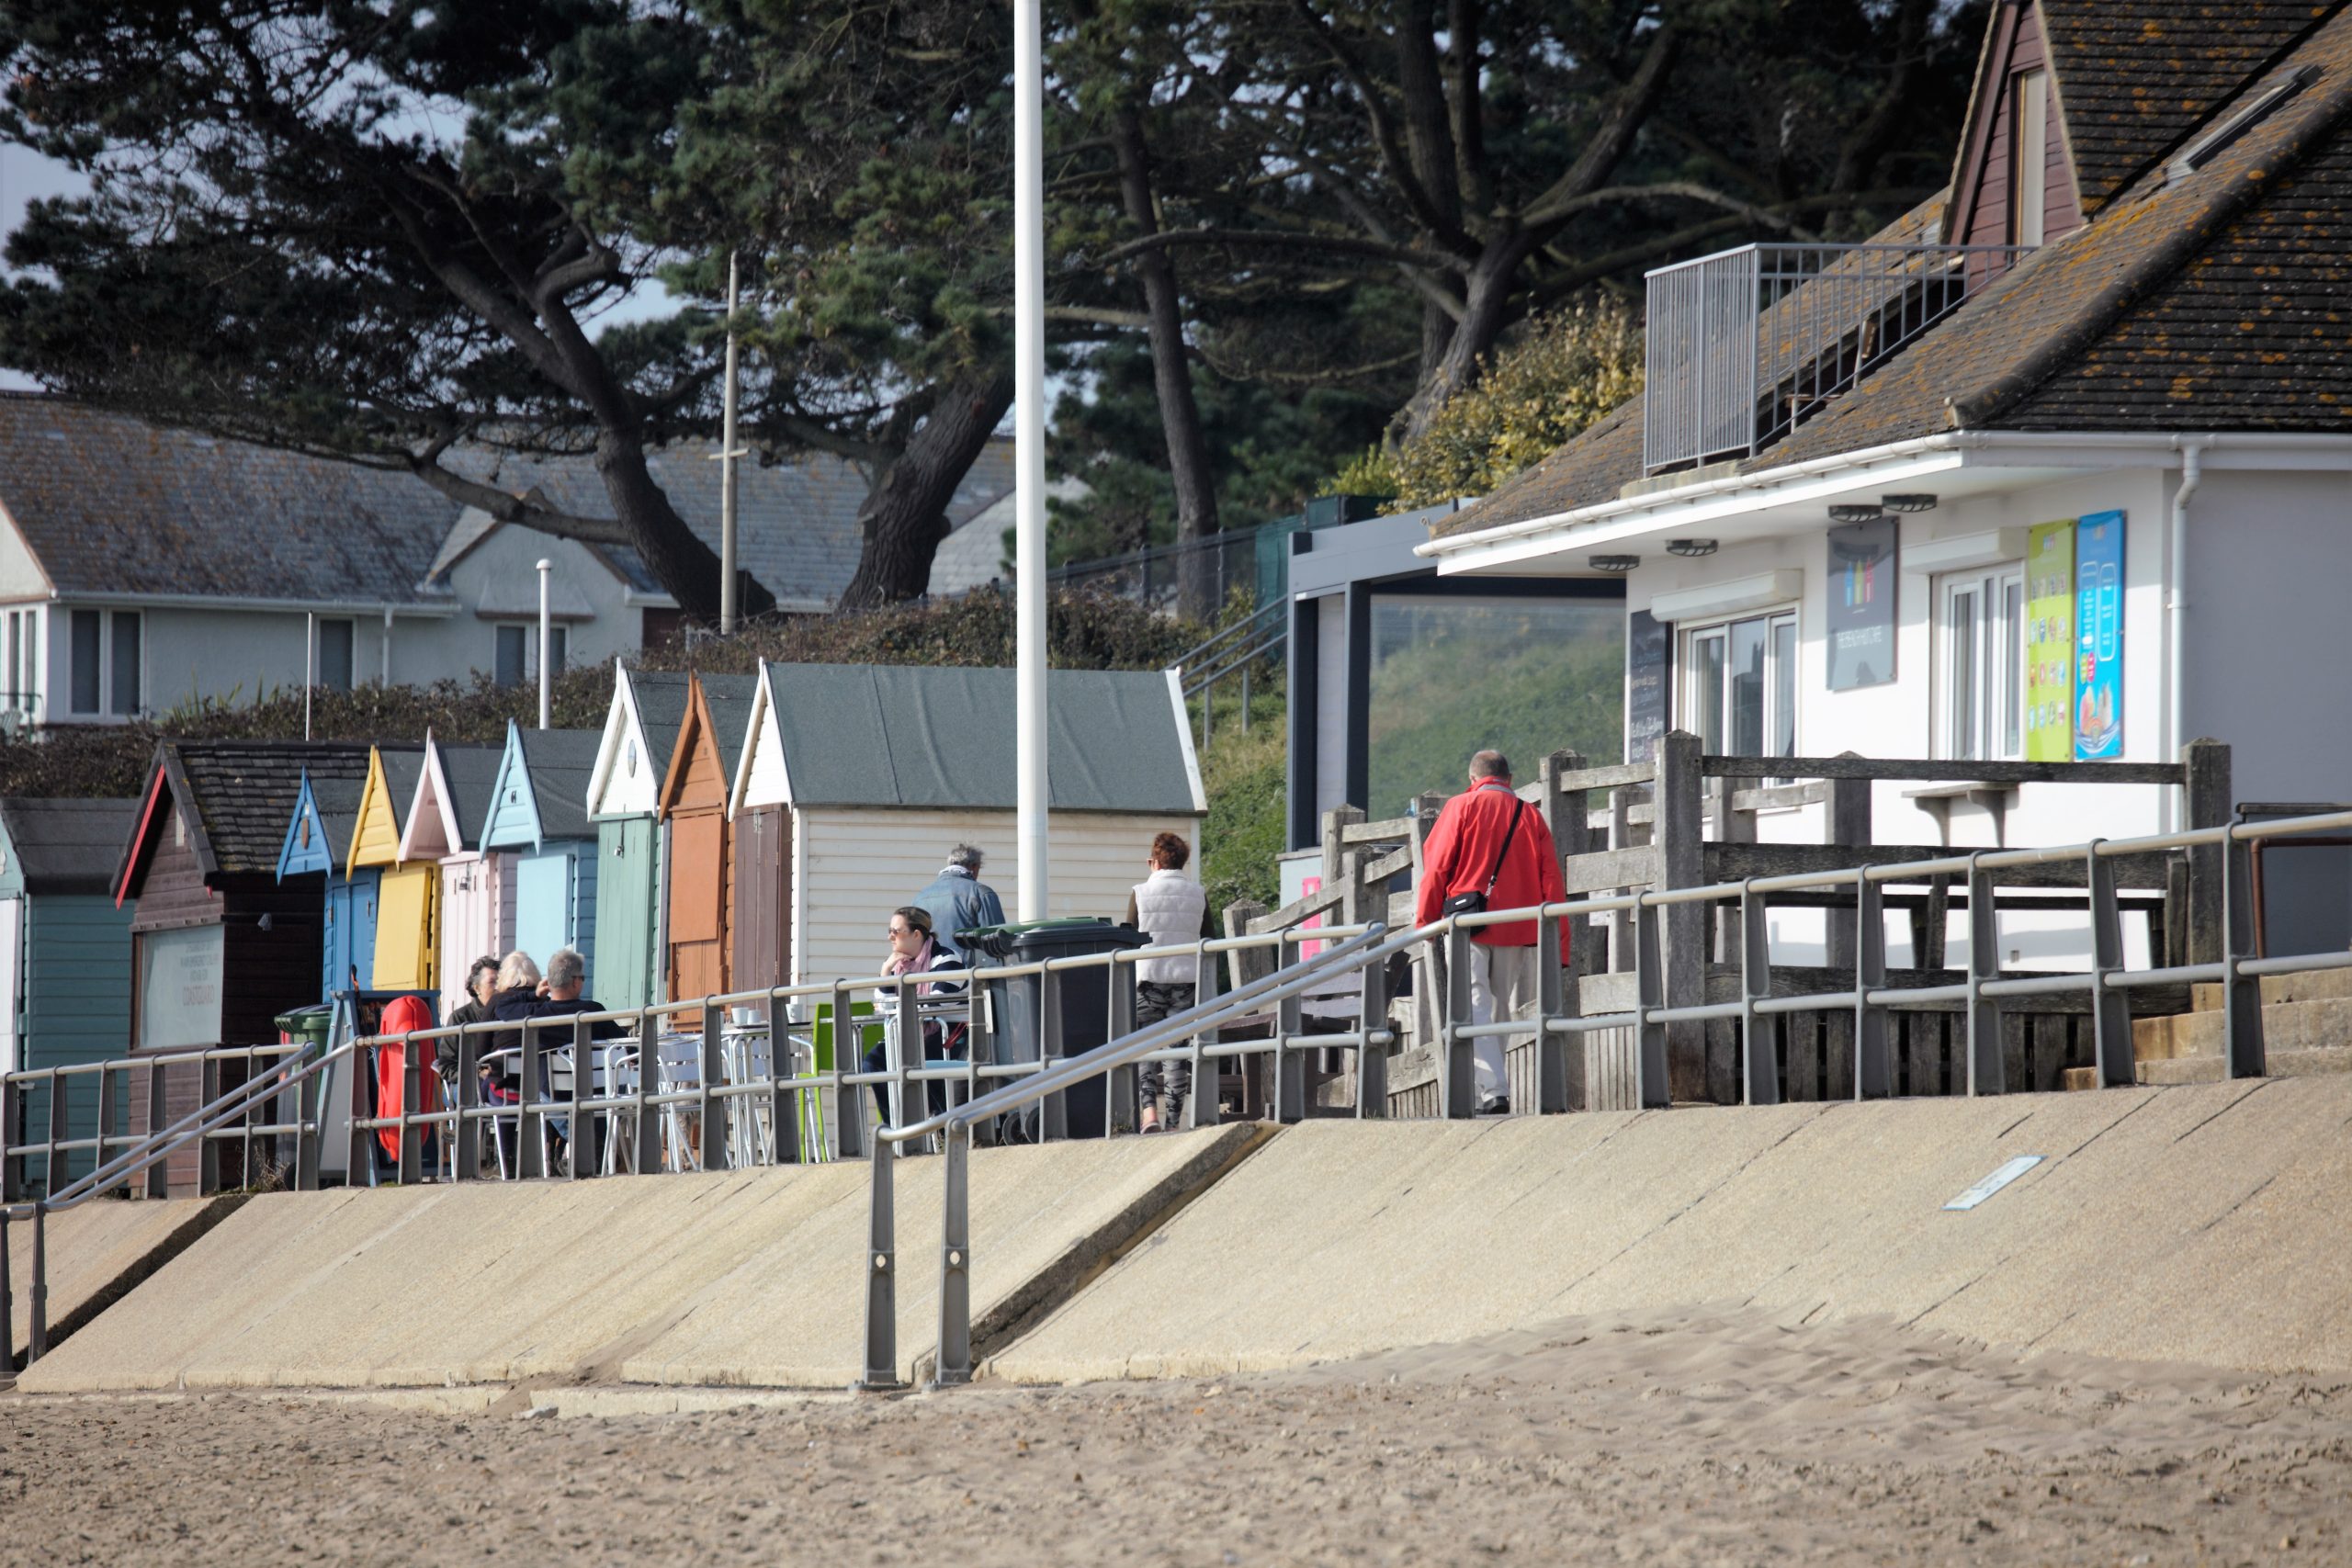 Friars Cliff Cafe and beach huts